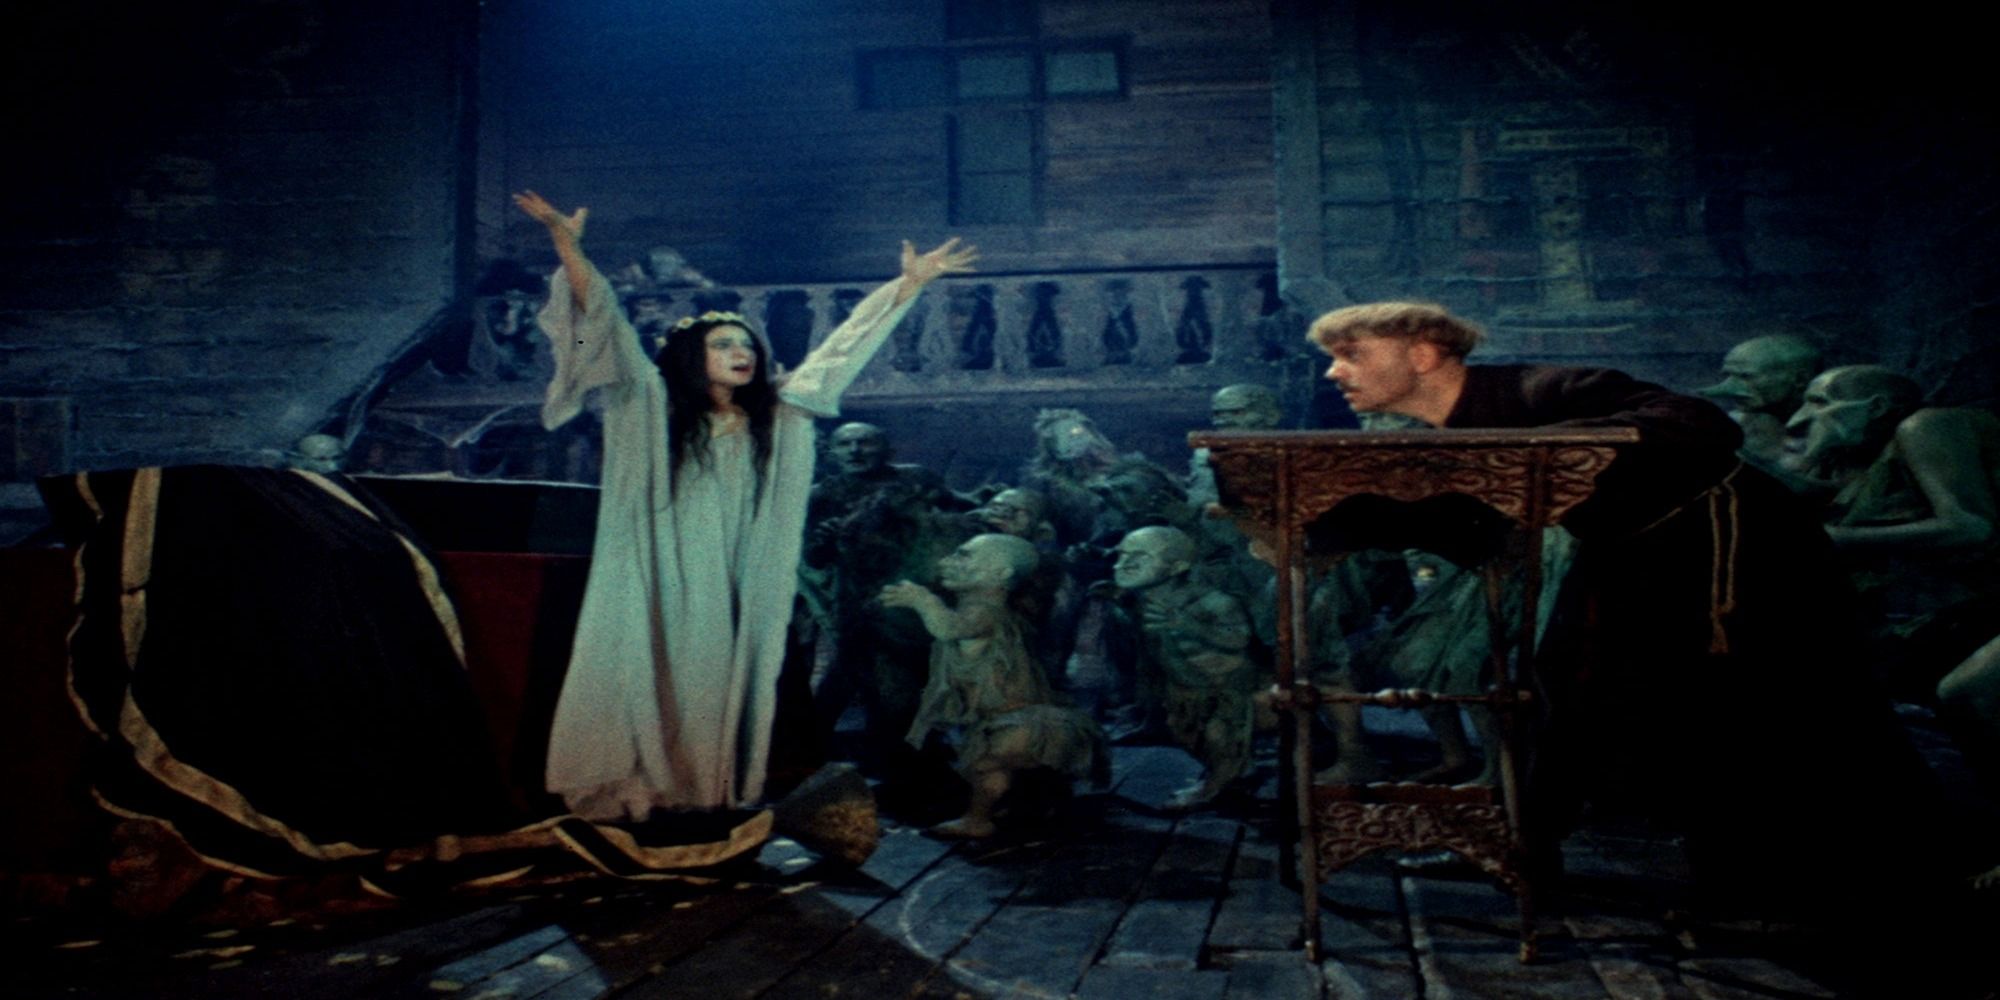 A woman in white raises her arms in Viy